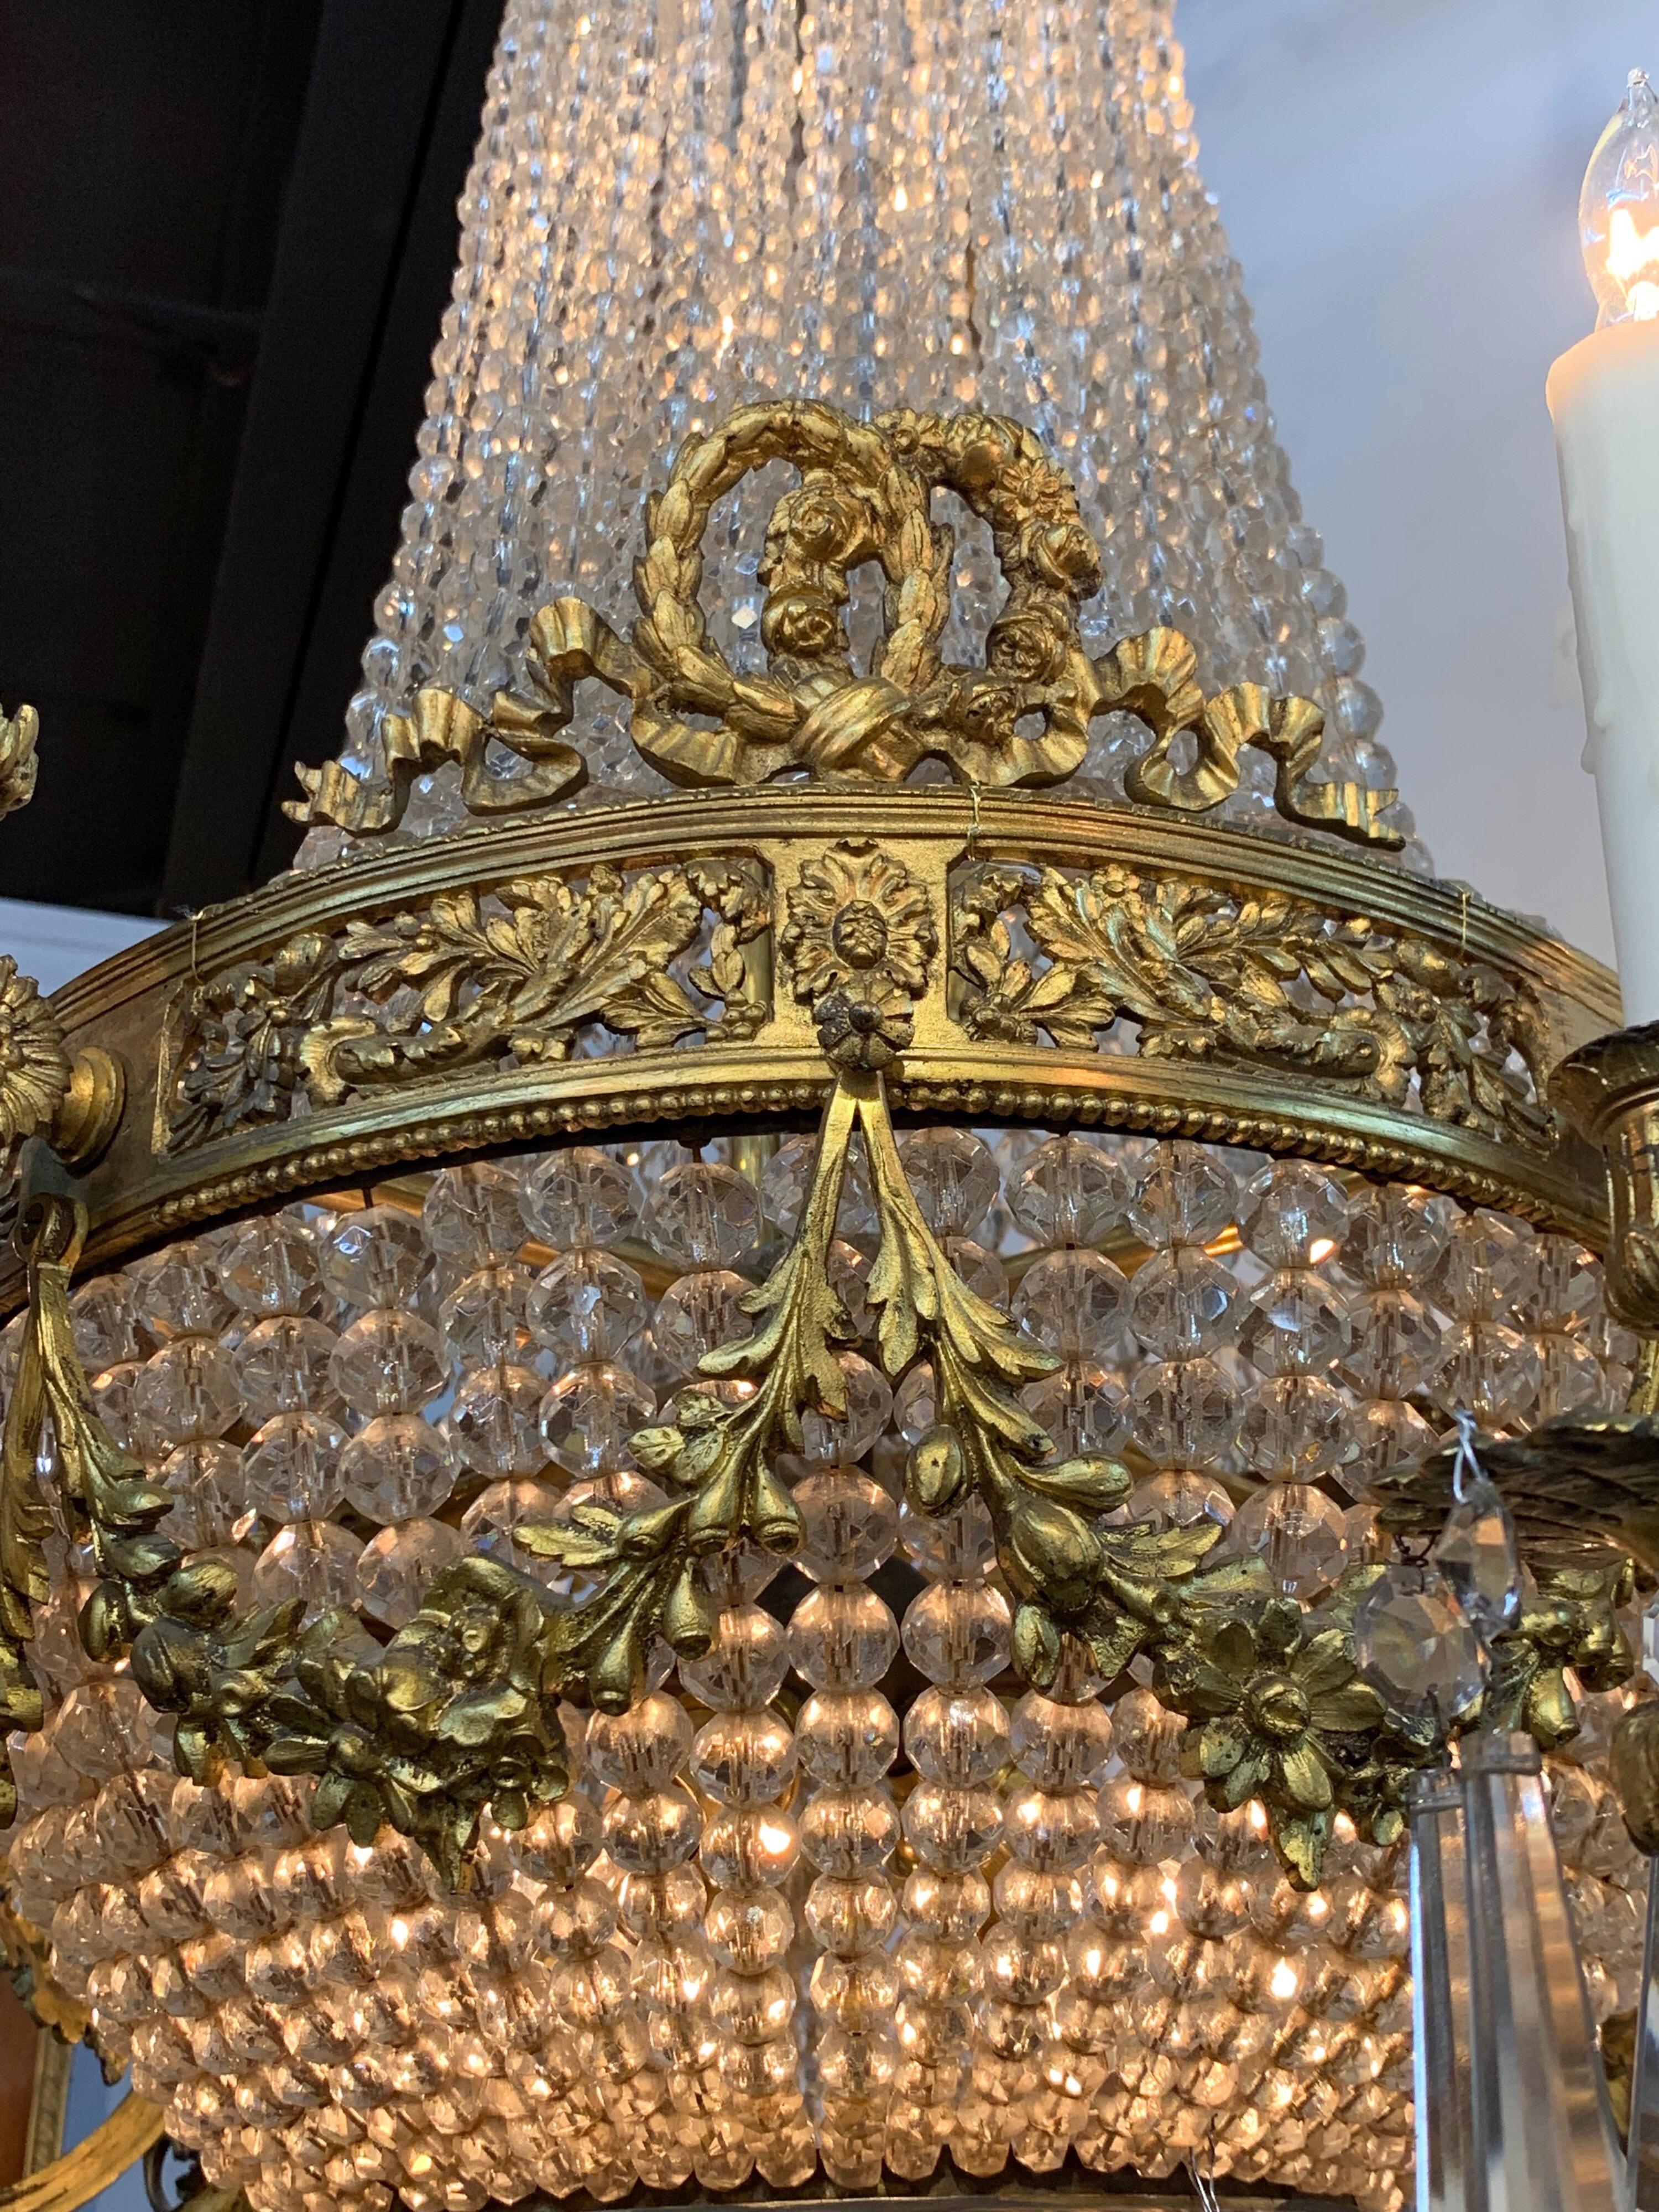 Stunning 19th century Louis XVI style bronze and crystal chandelier with 8 lights. Very finely cast bronze with good antique patina. Just re-wired and cleaned and ready to hang. Matching chain and canopy included.